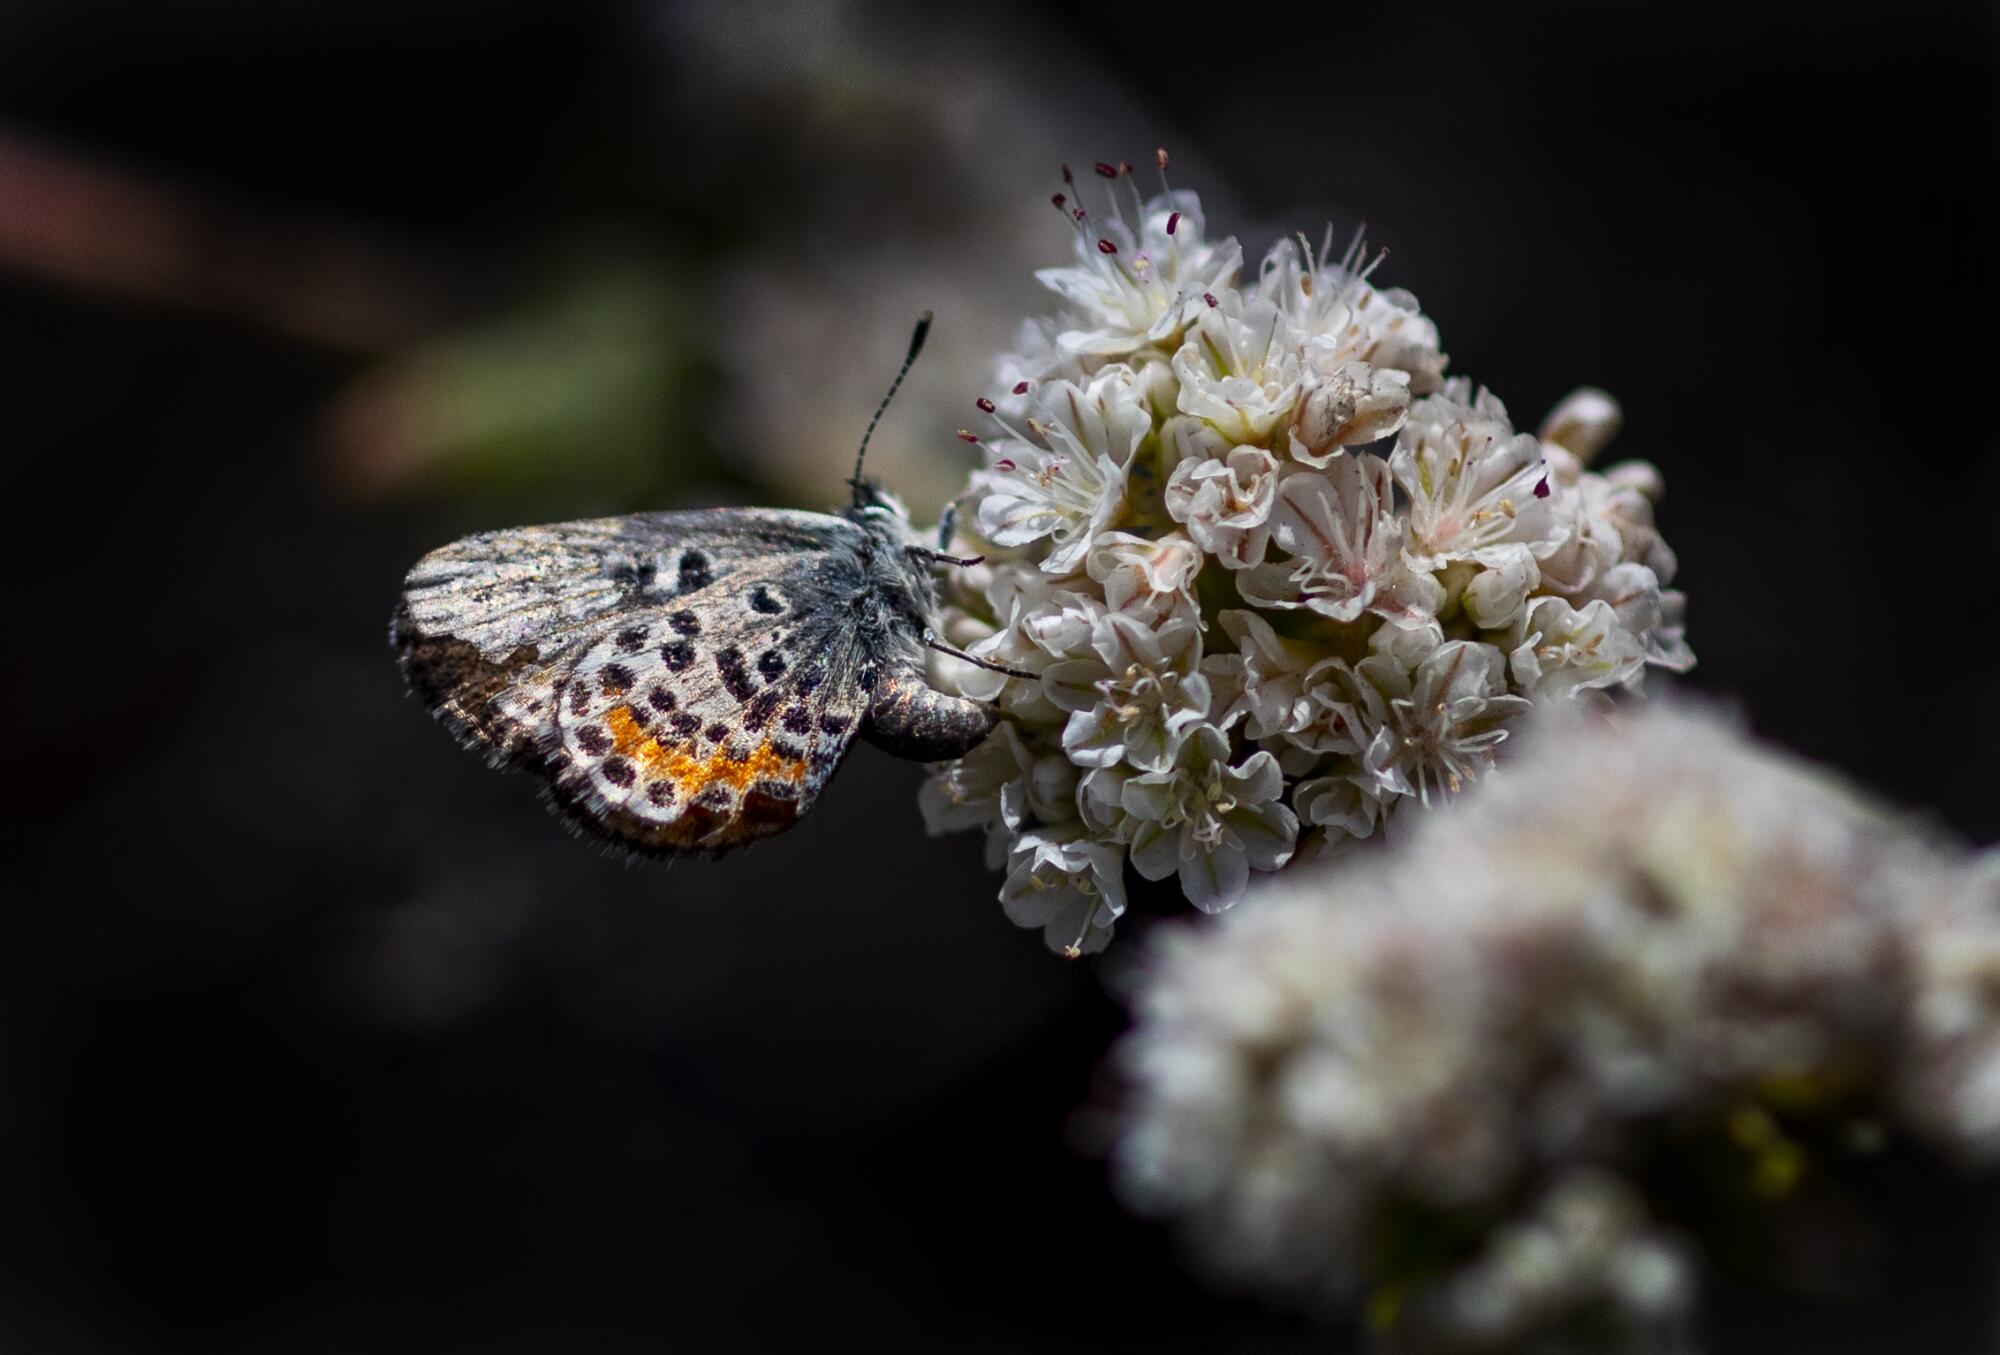 An El Segundo blue butterfly on a cluster of white flowers.